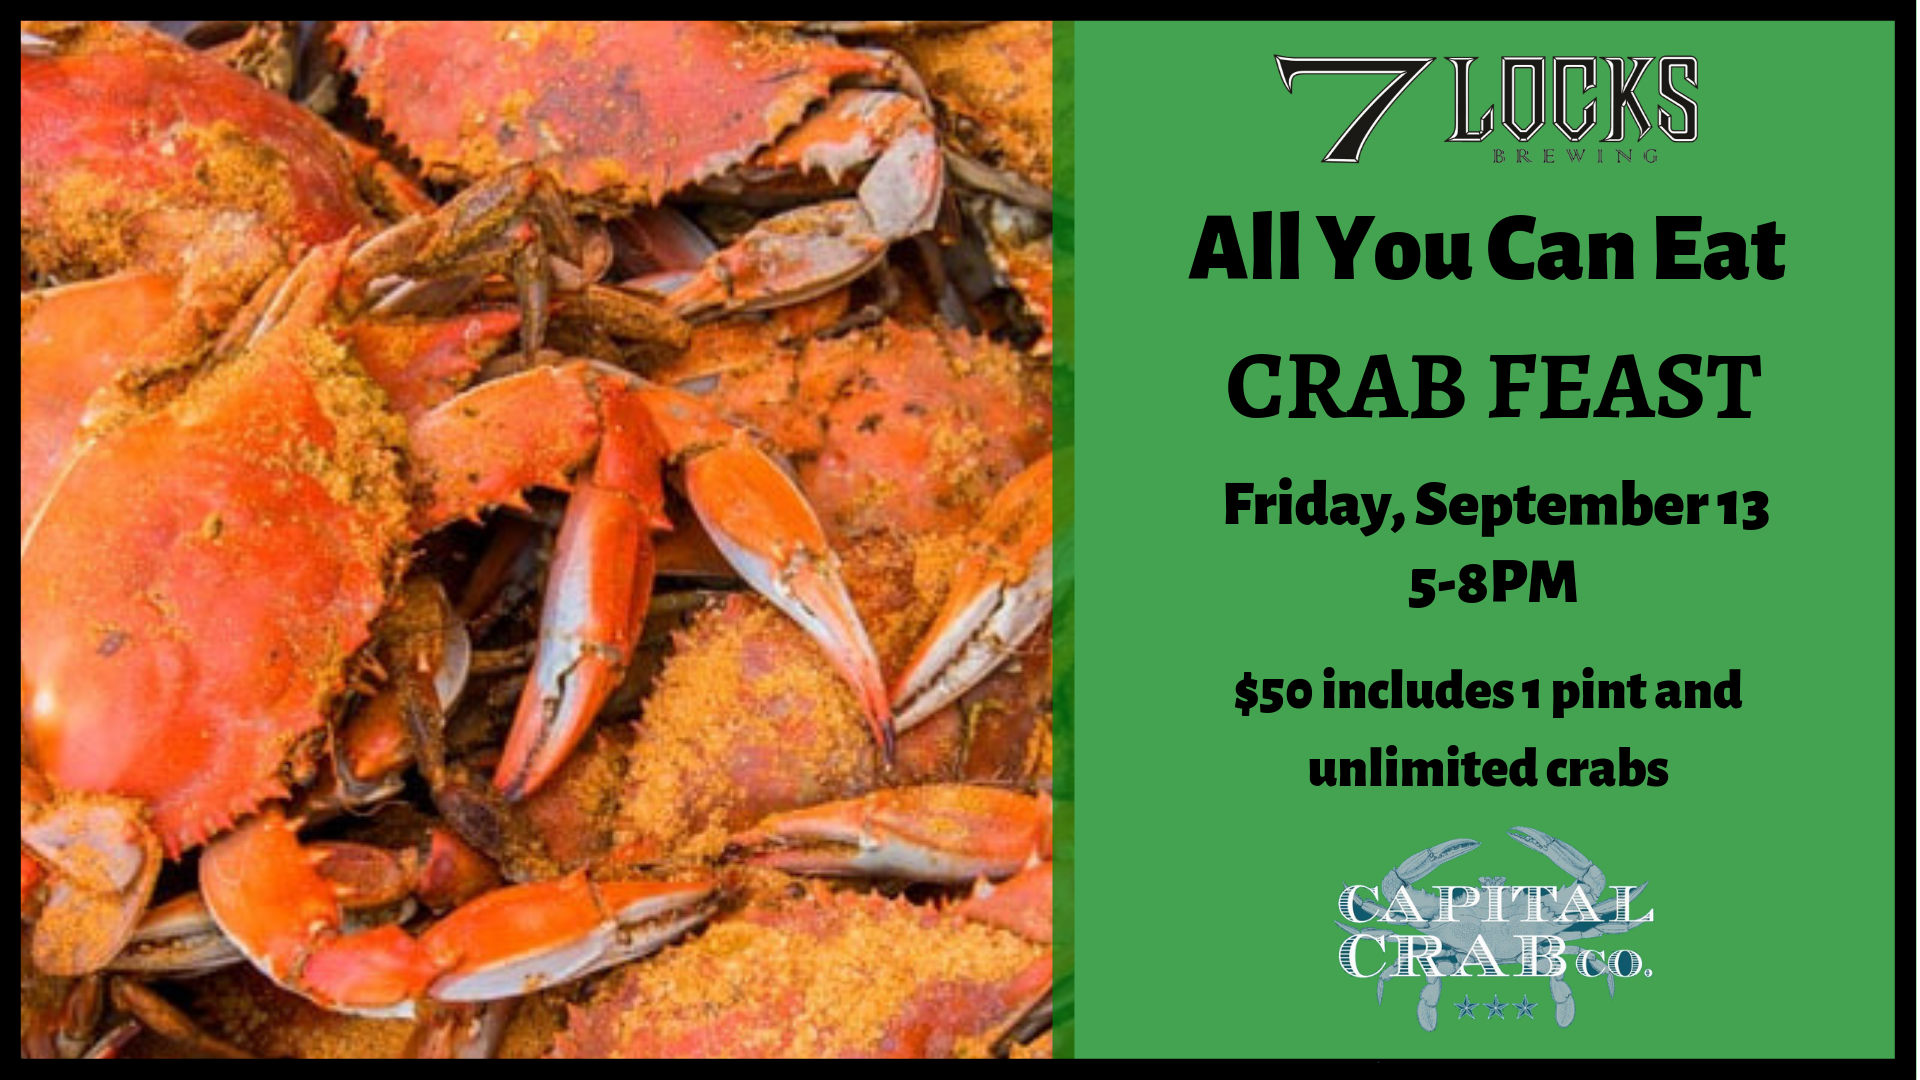 All You Can Eat Crab Feast – 7 Locks Brewing